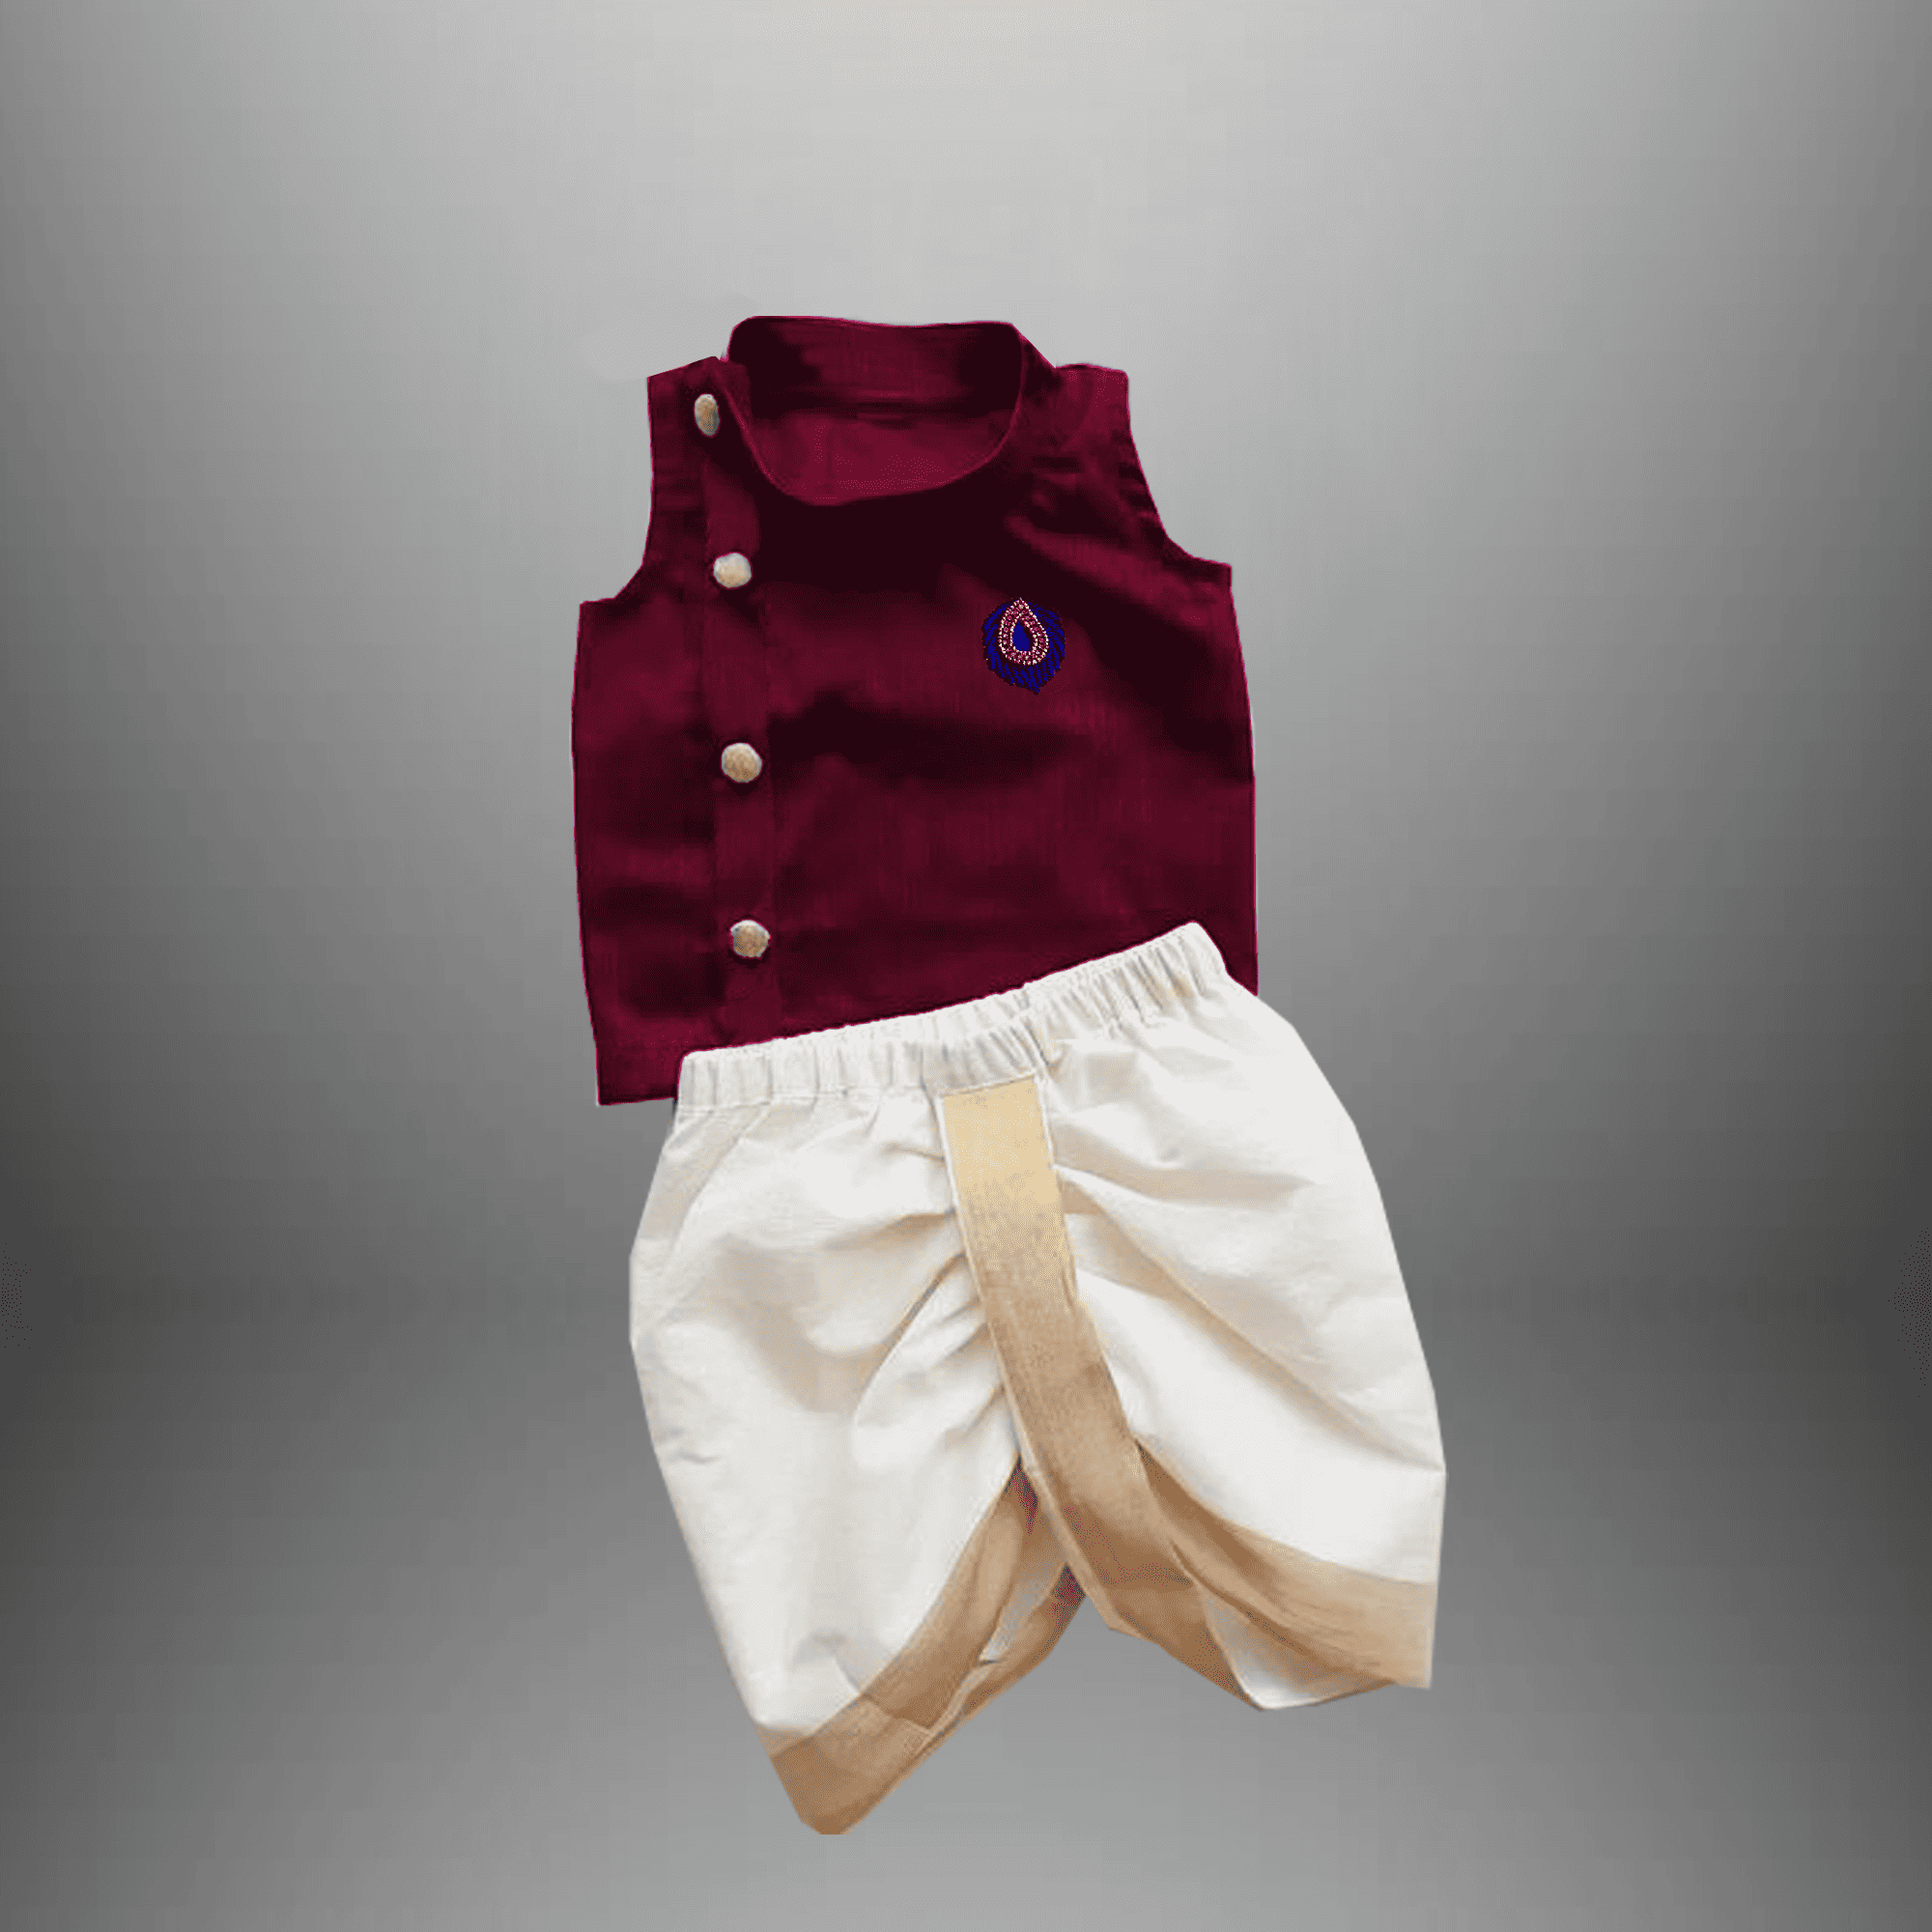 Toddler's off white dhoti and maroon top set-RKFCTT088